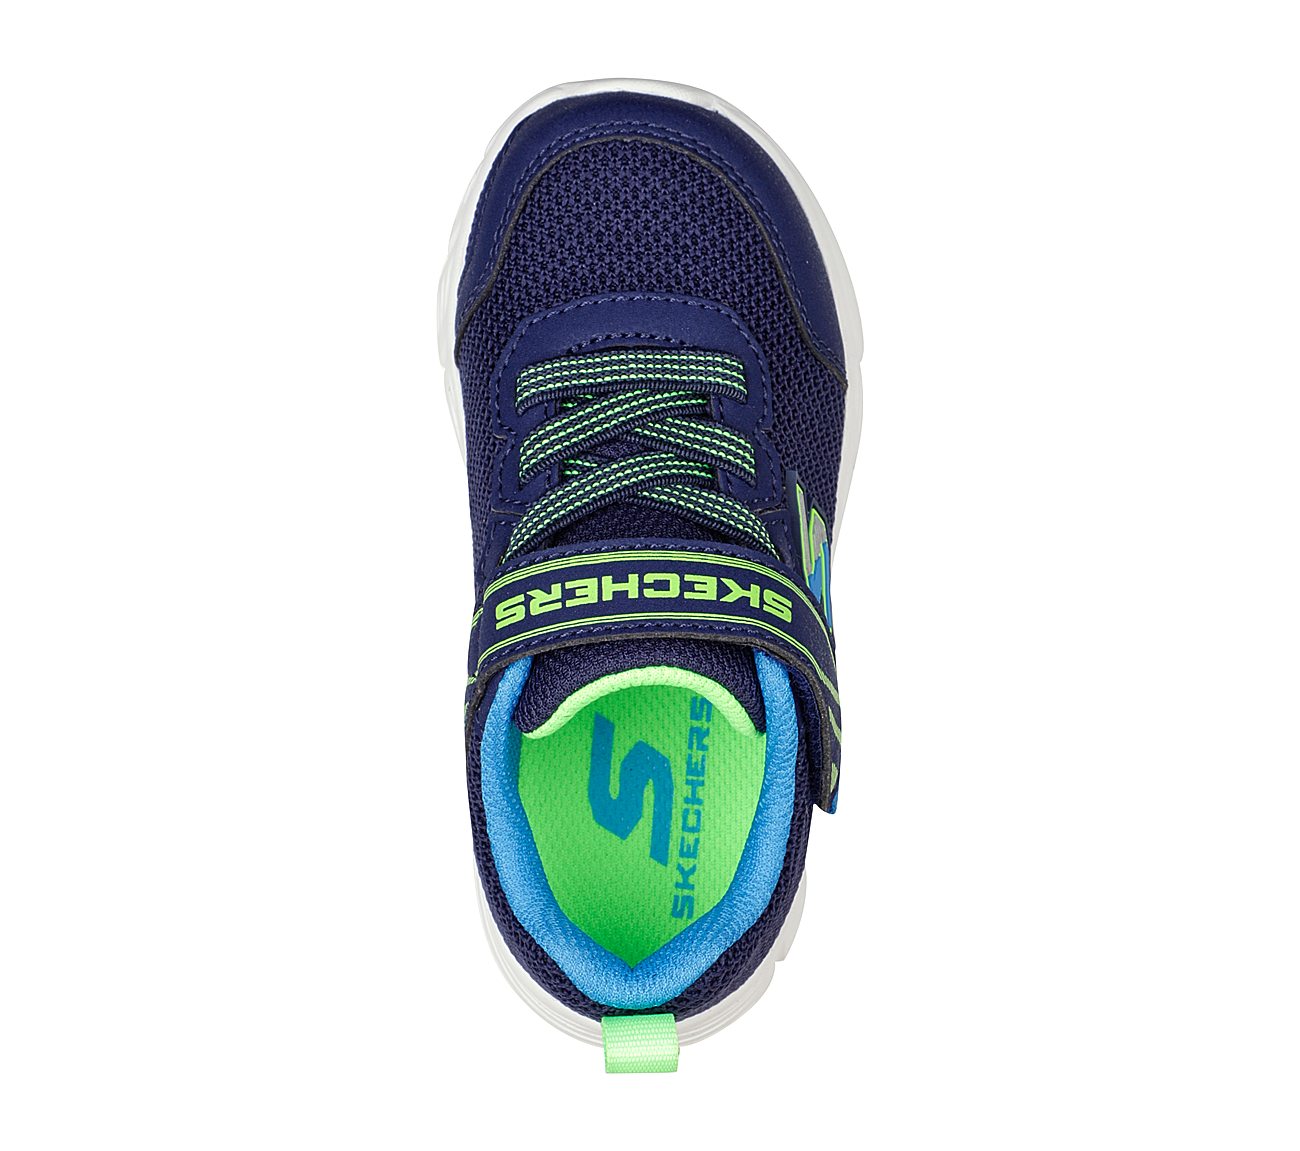 COMFY FLEX - MINI TRAINER, NAVY/LIME Footwear Top View